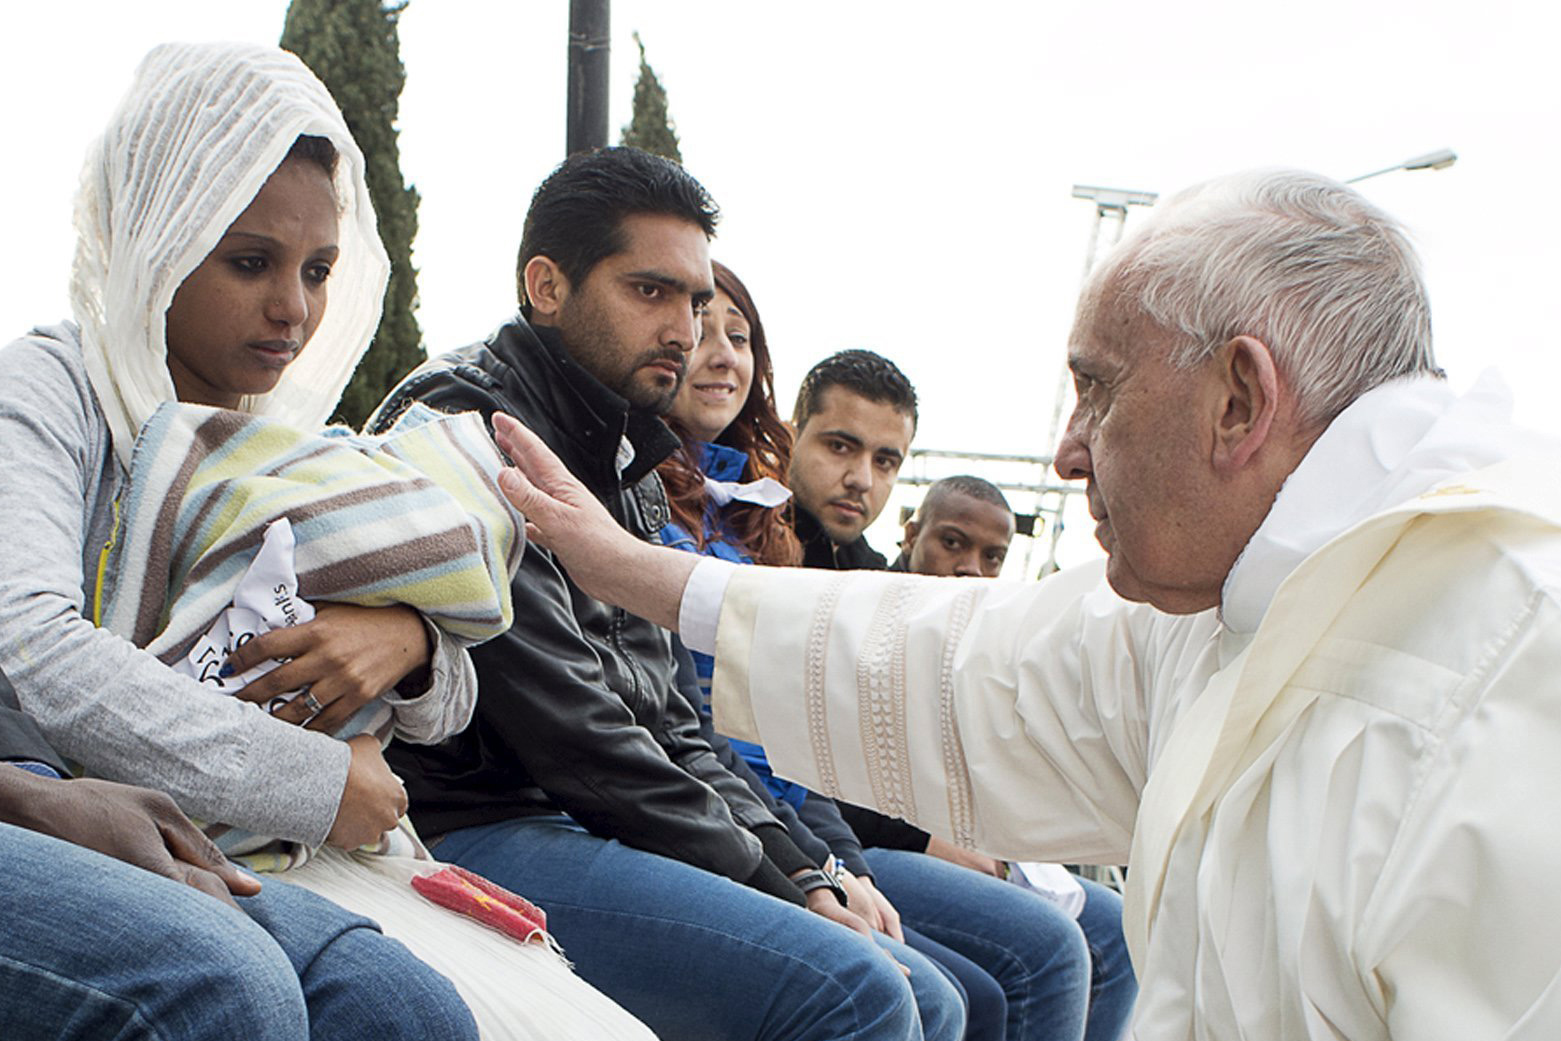 Pope Francis blesses a baby during the foot-washing ritual at the Castelnuovo di Porto refugees center near Rome, Italy, on March 24, 2016.